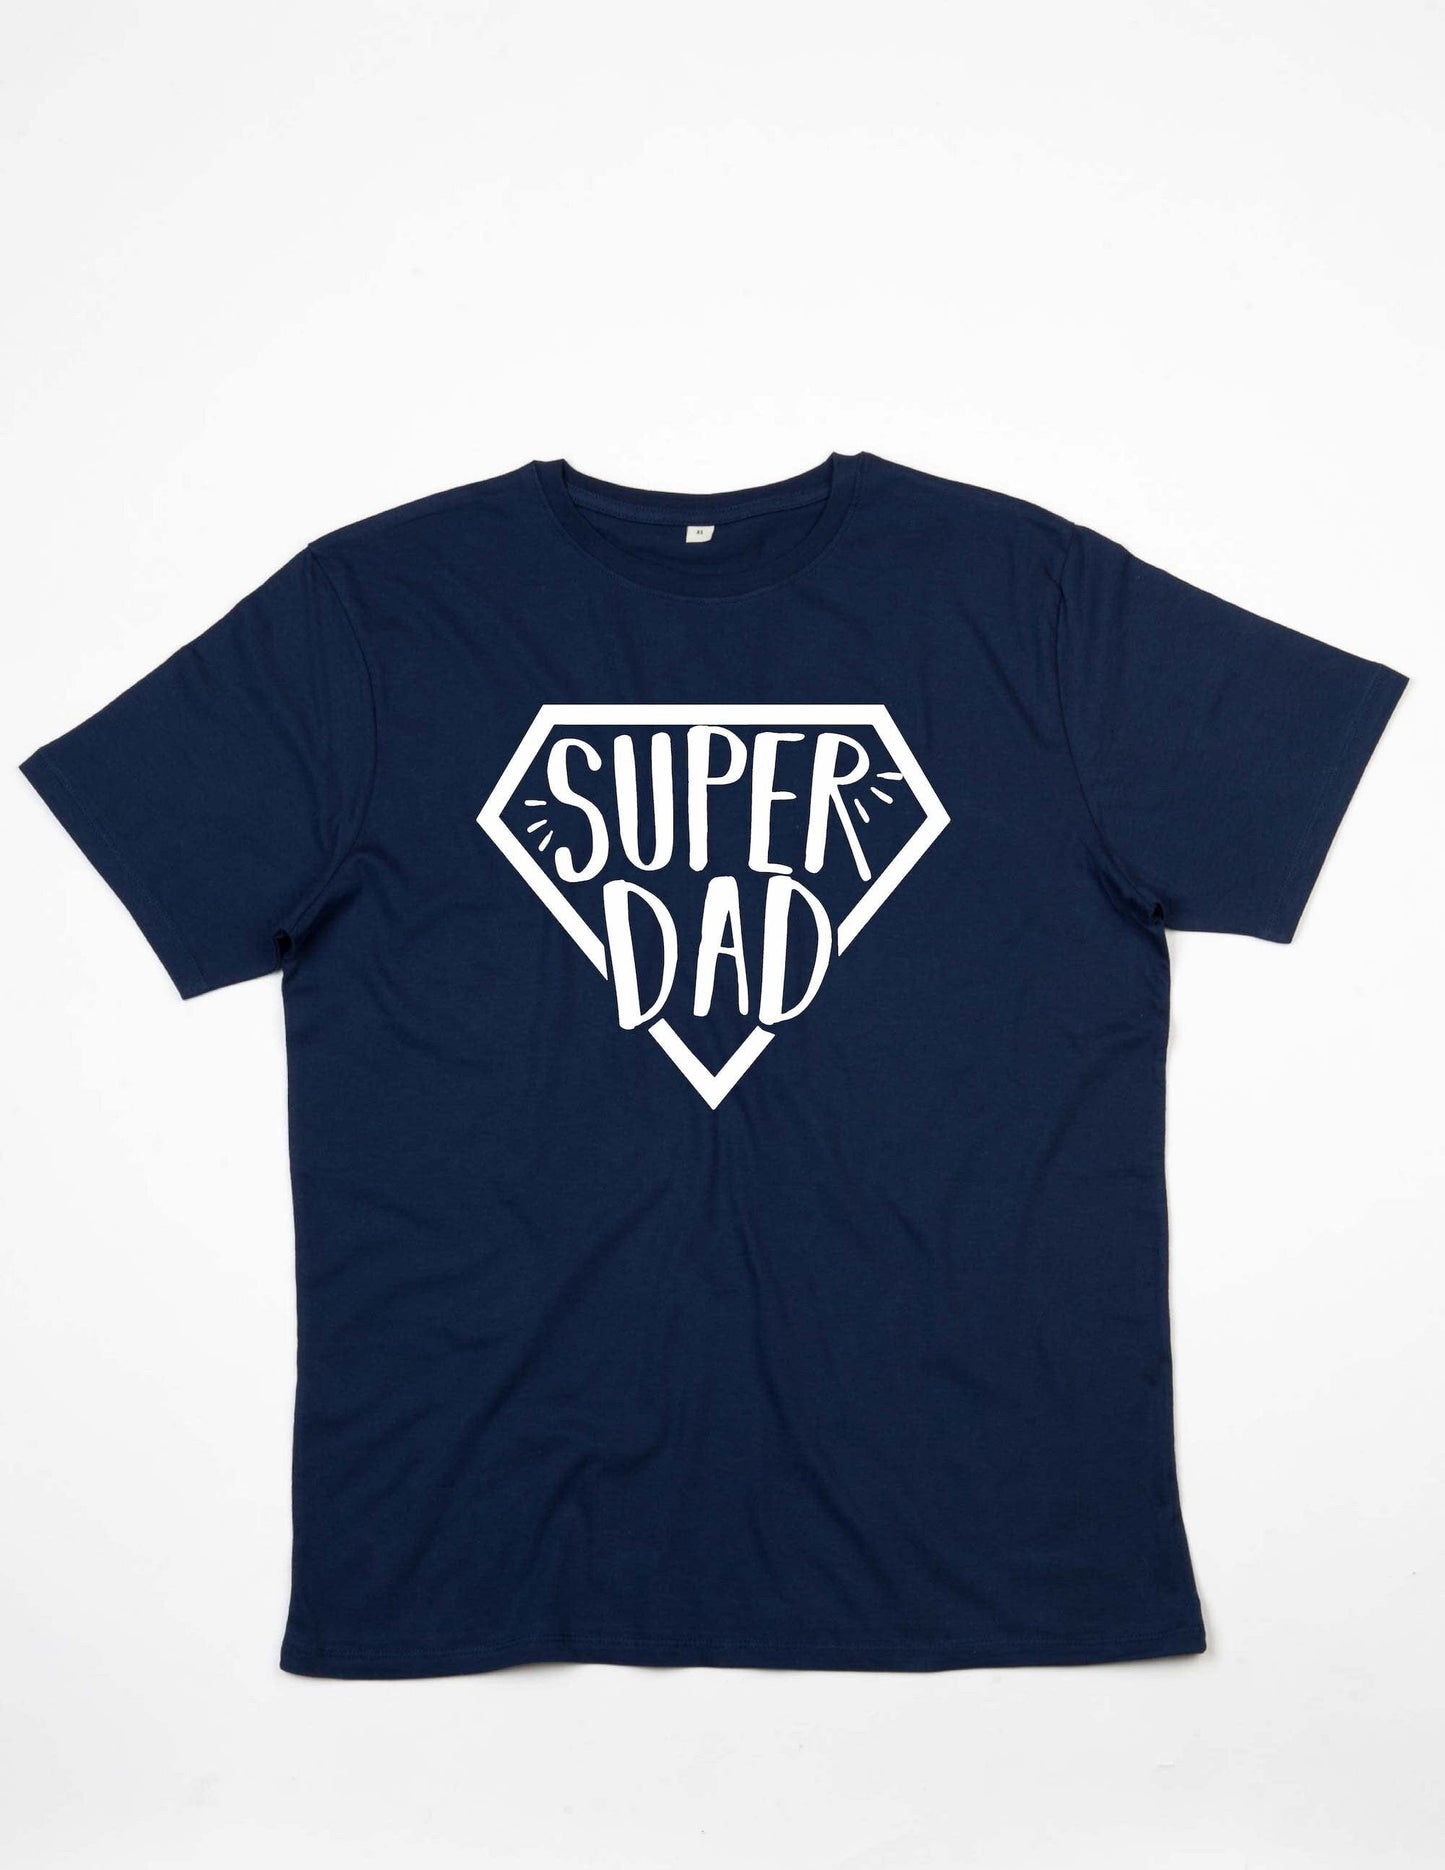 Super Dad shirt , fathers day funny super hero dad shirt new dad t shirt, dad t-shirt, Funny Birthday dad gifts, Fathers day gift for daddy